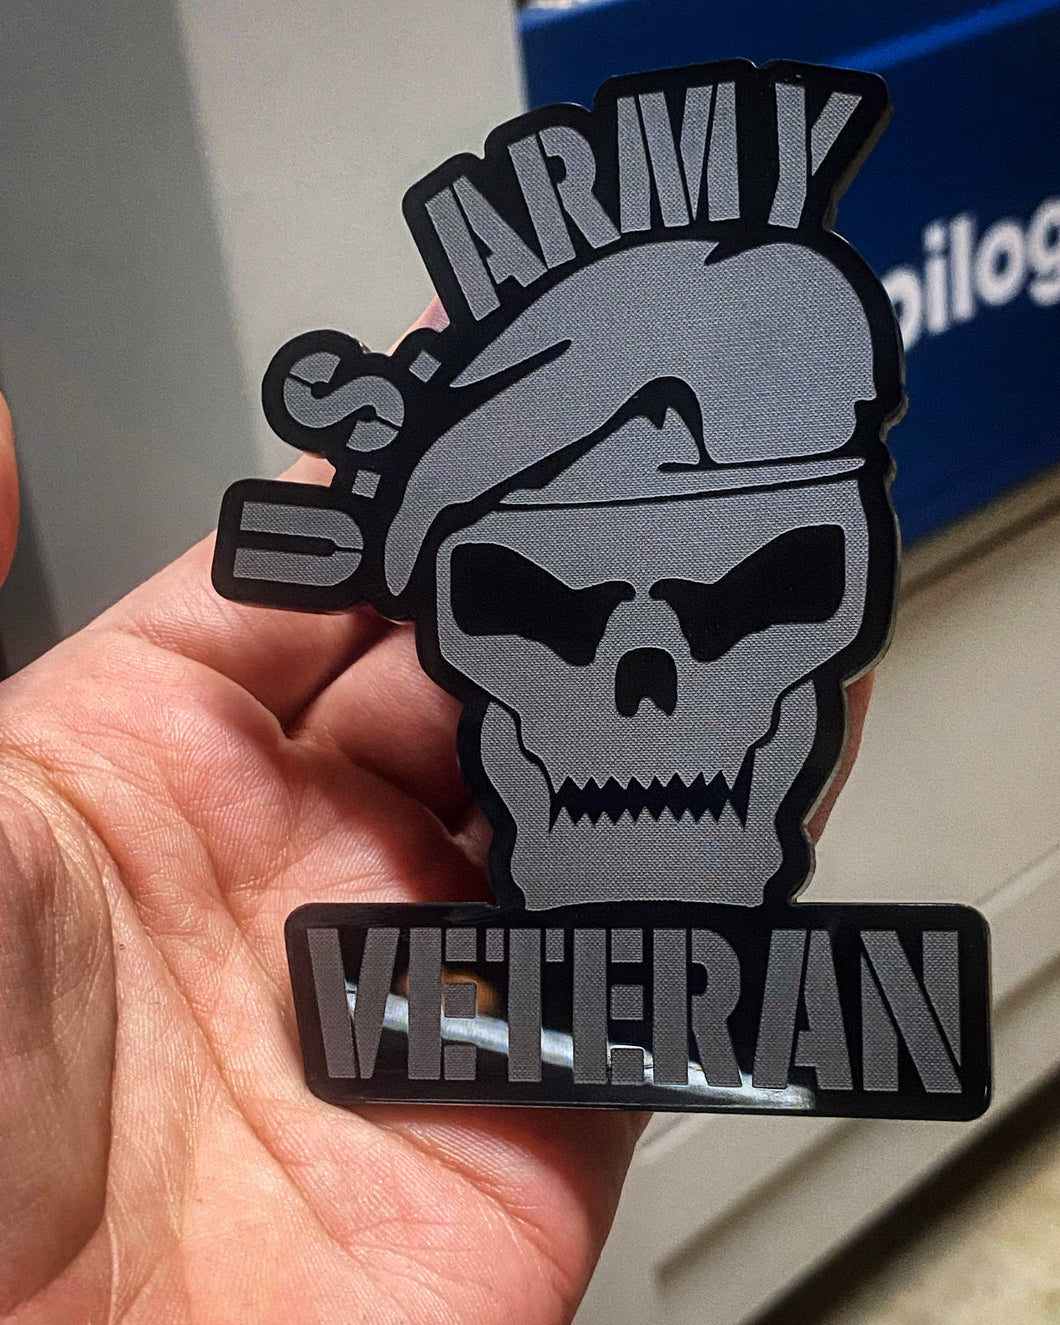 US ARMY Veteran Badges (2) - Forged Concepts